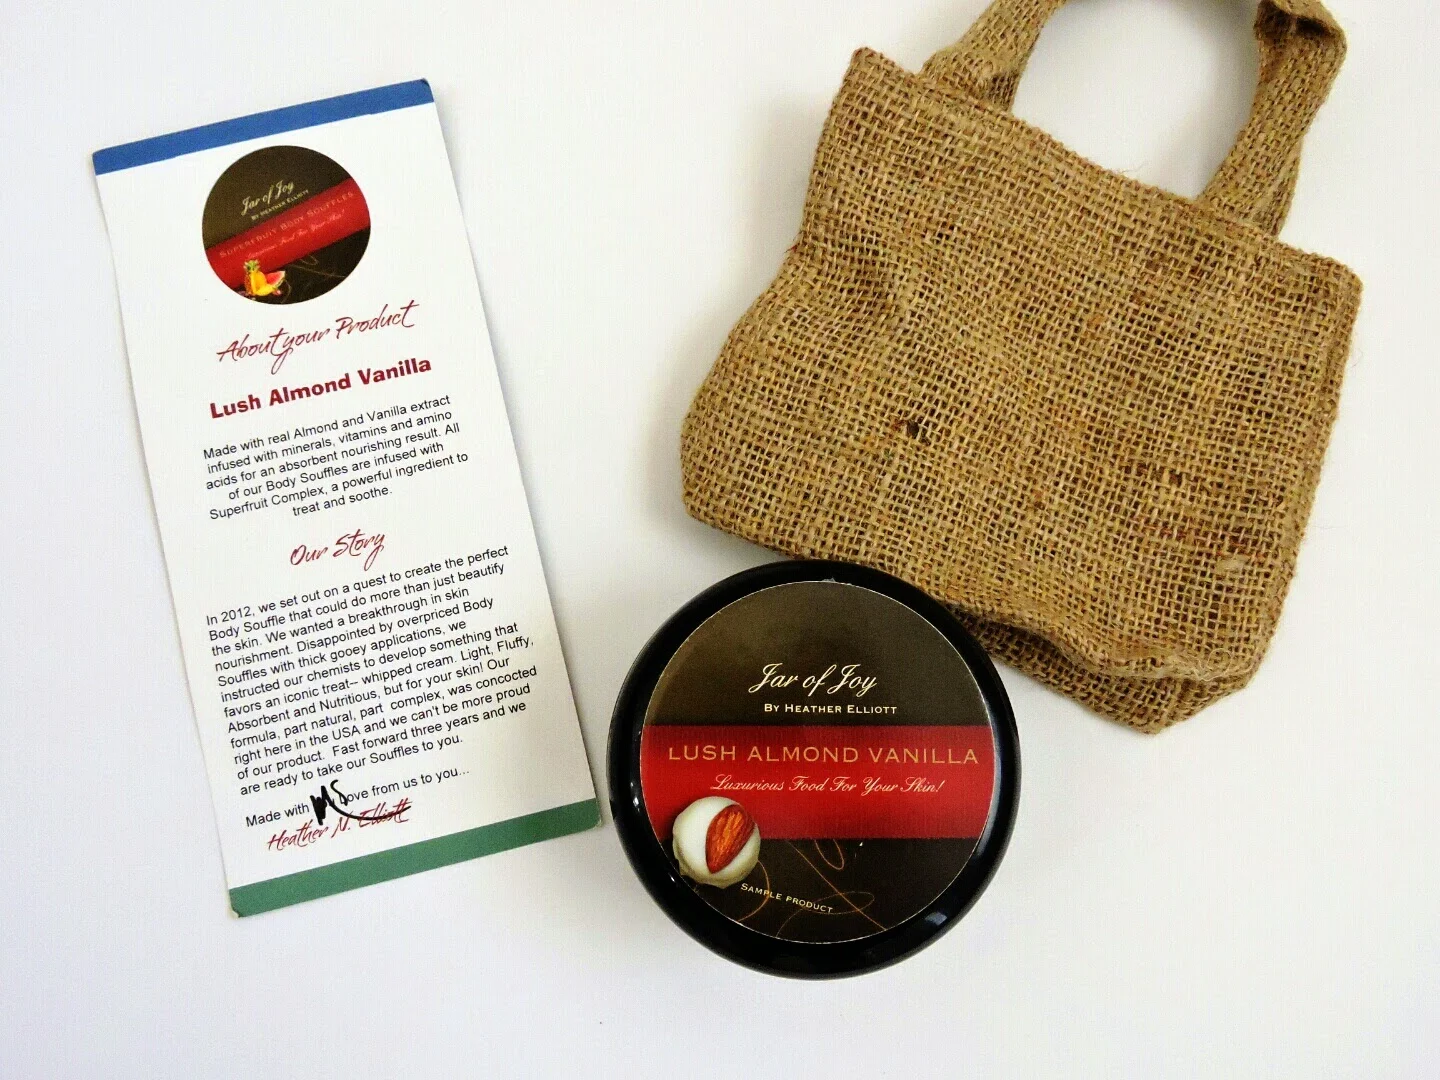 Goodbye Winter Skin with Jar of Joy Body Souffle and Giveaway Ends 4/7  via www.productreviewmom.com